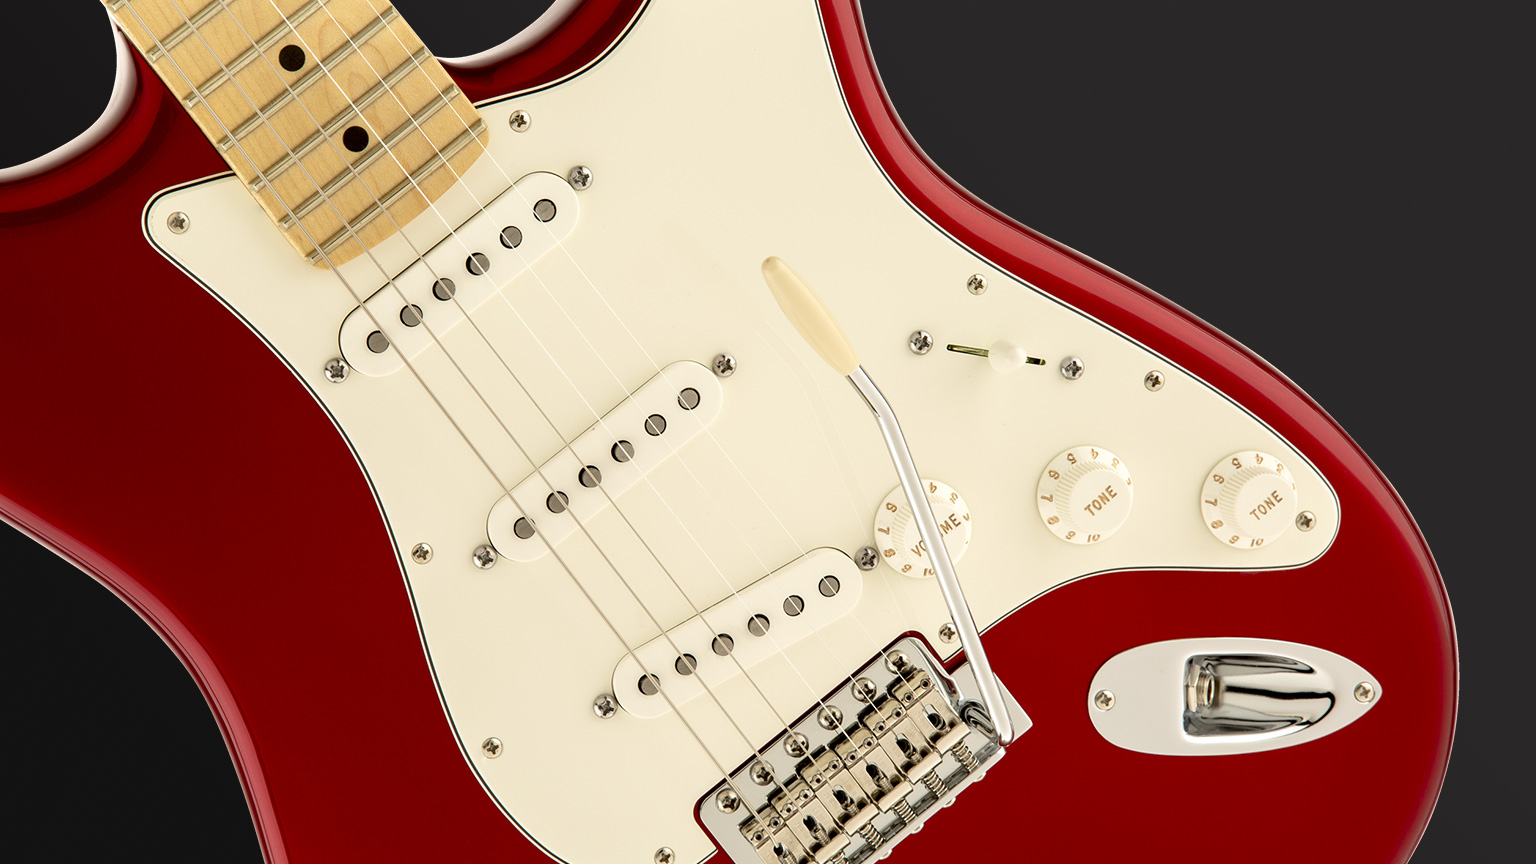 Above, an American Special series Stratocaster with a satin urethane finish (a type of polyurethane finish).